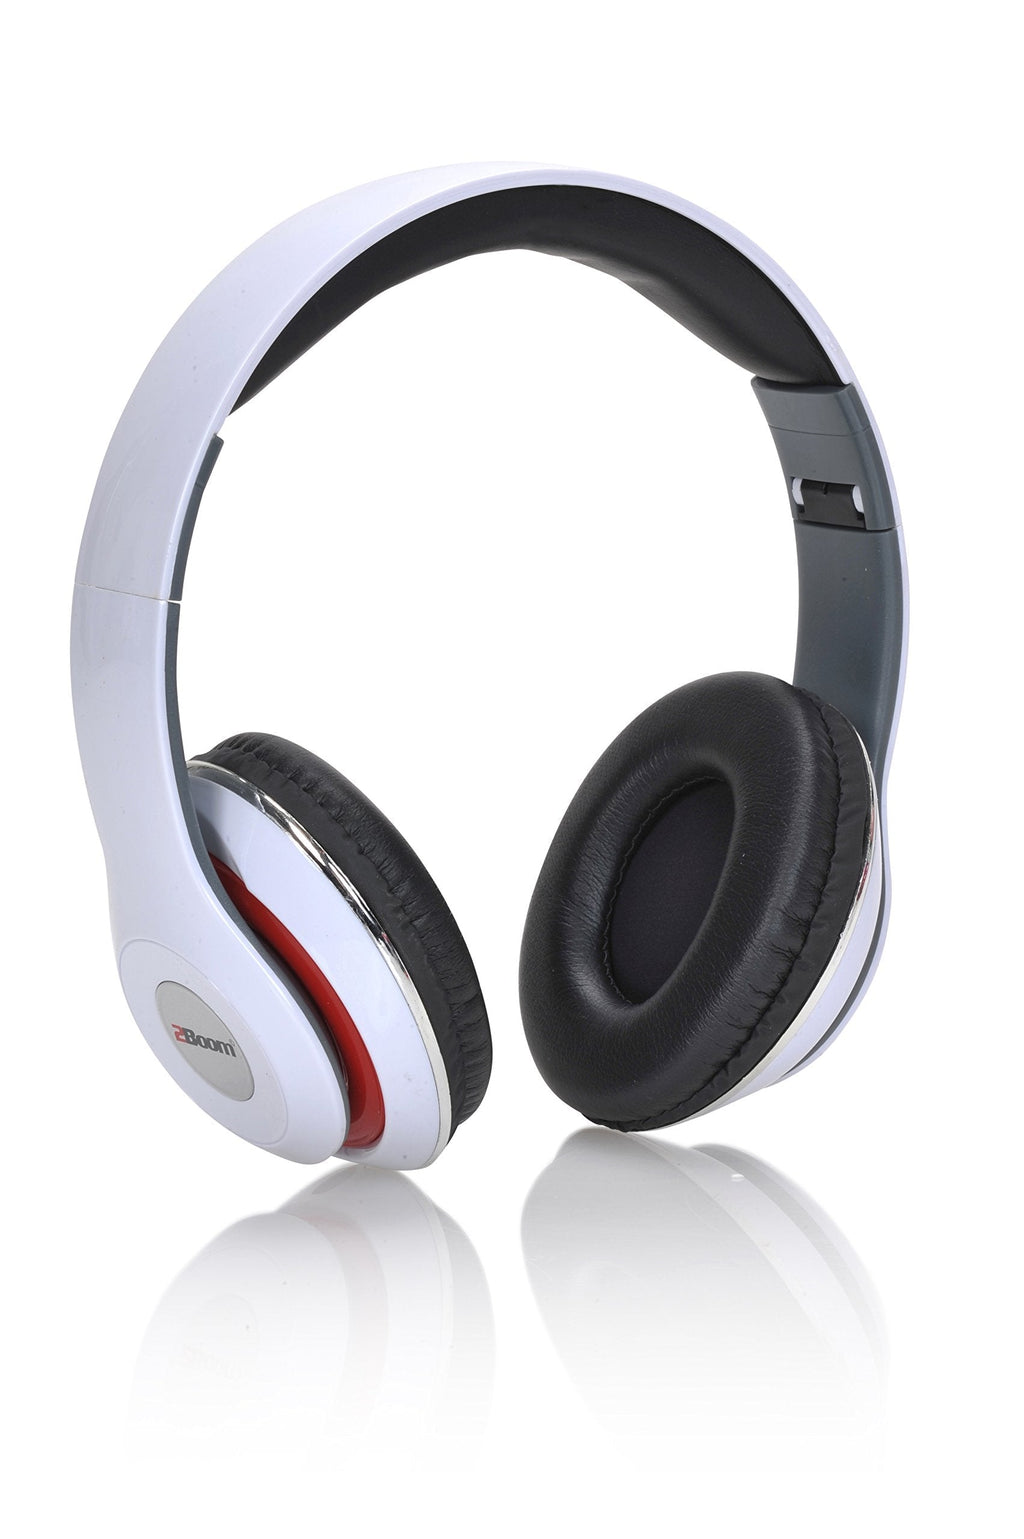 2BOOM MIXX Professional Over Ear Studio Foldable Digital Stereo Bass Wired Headphone White